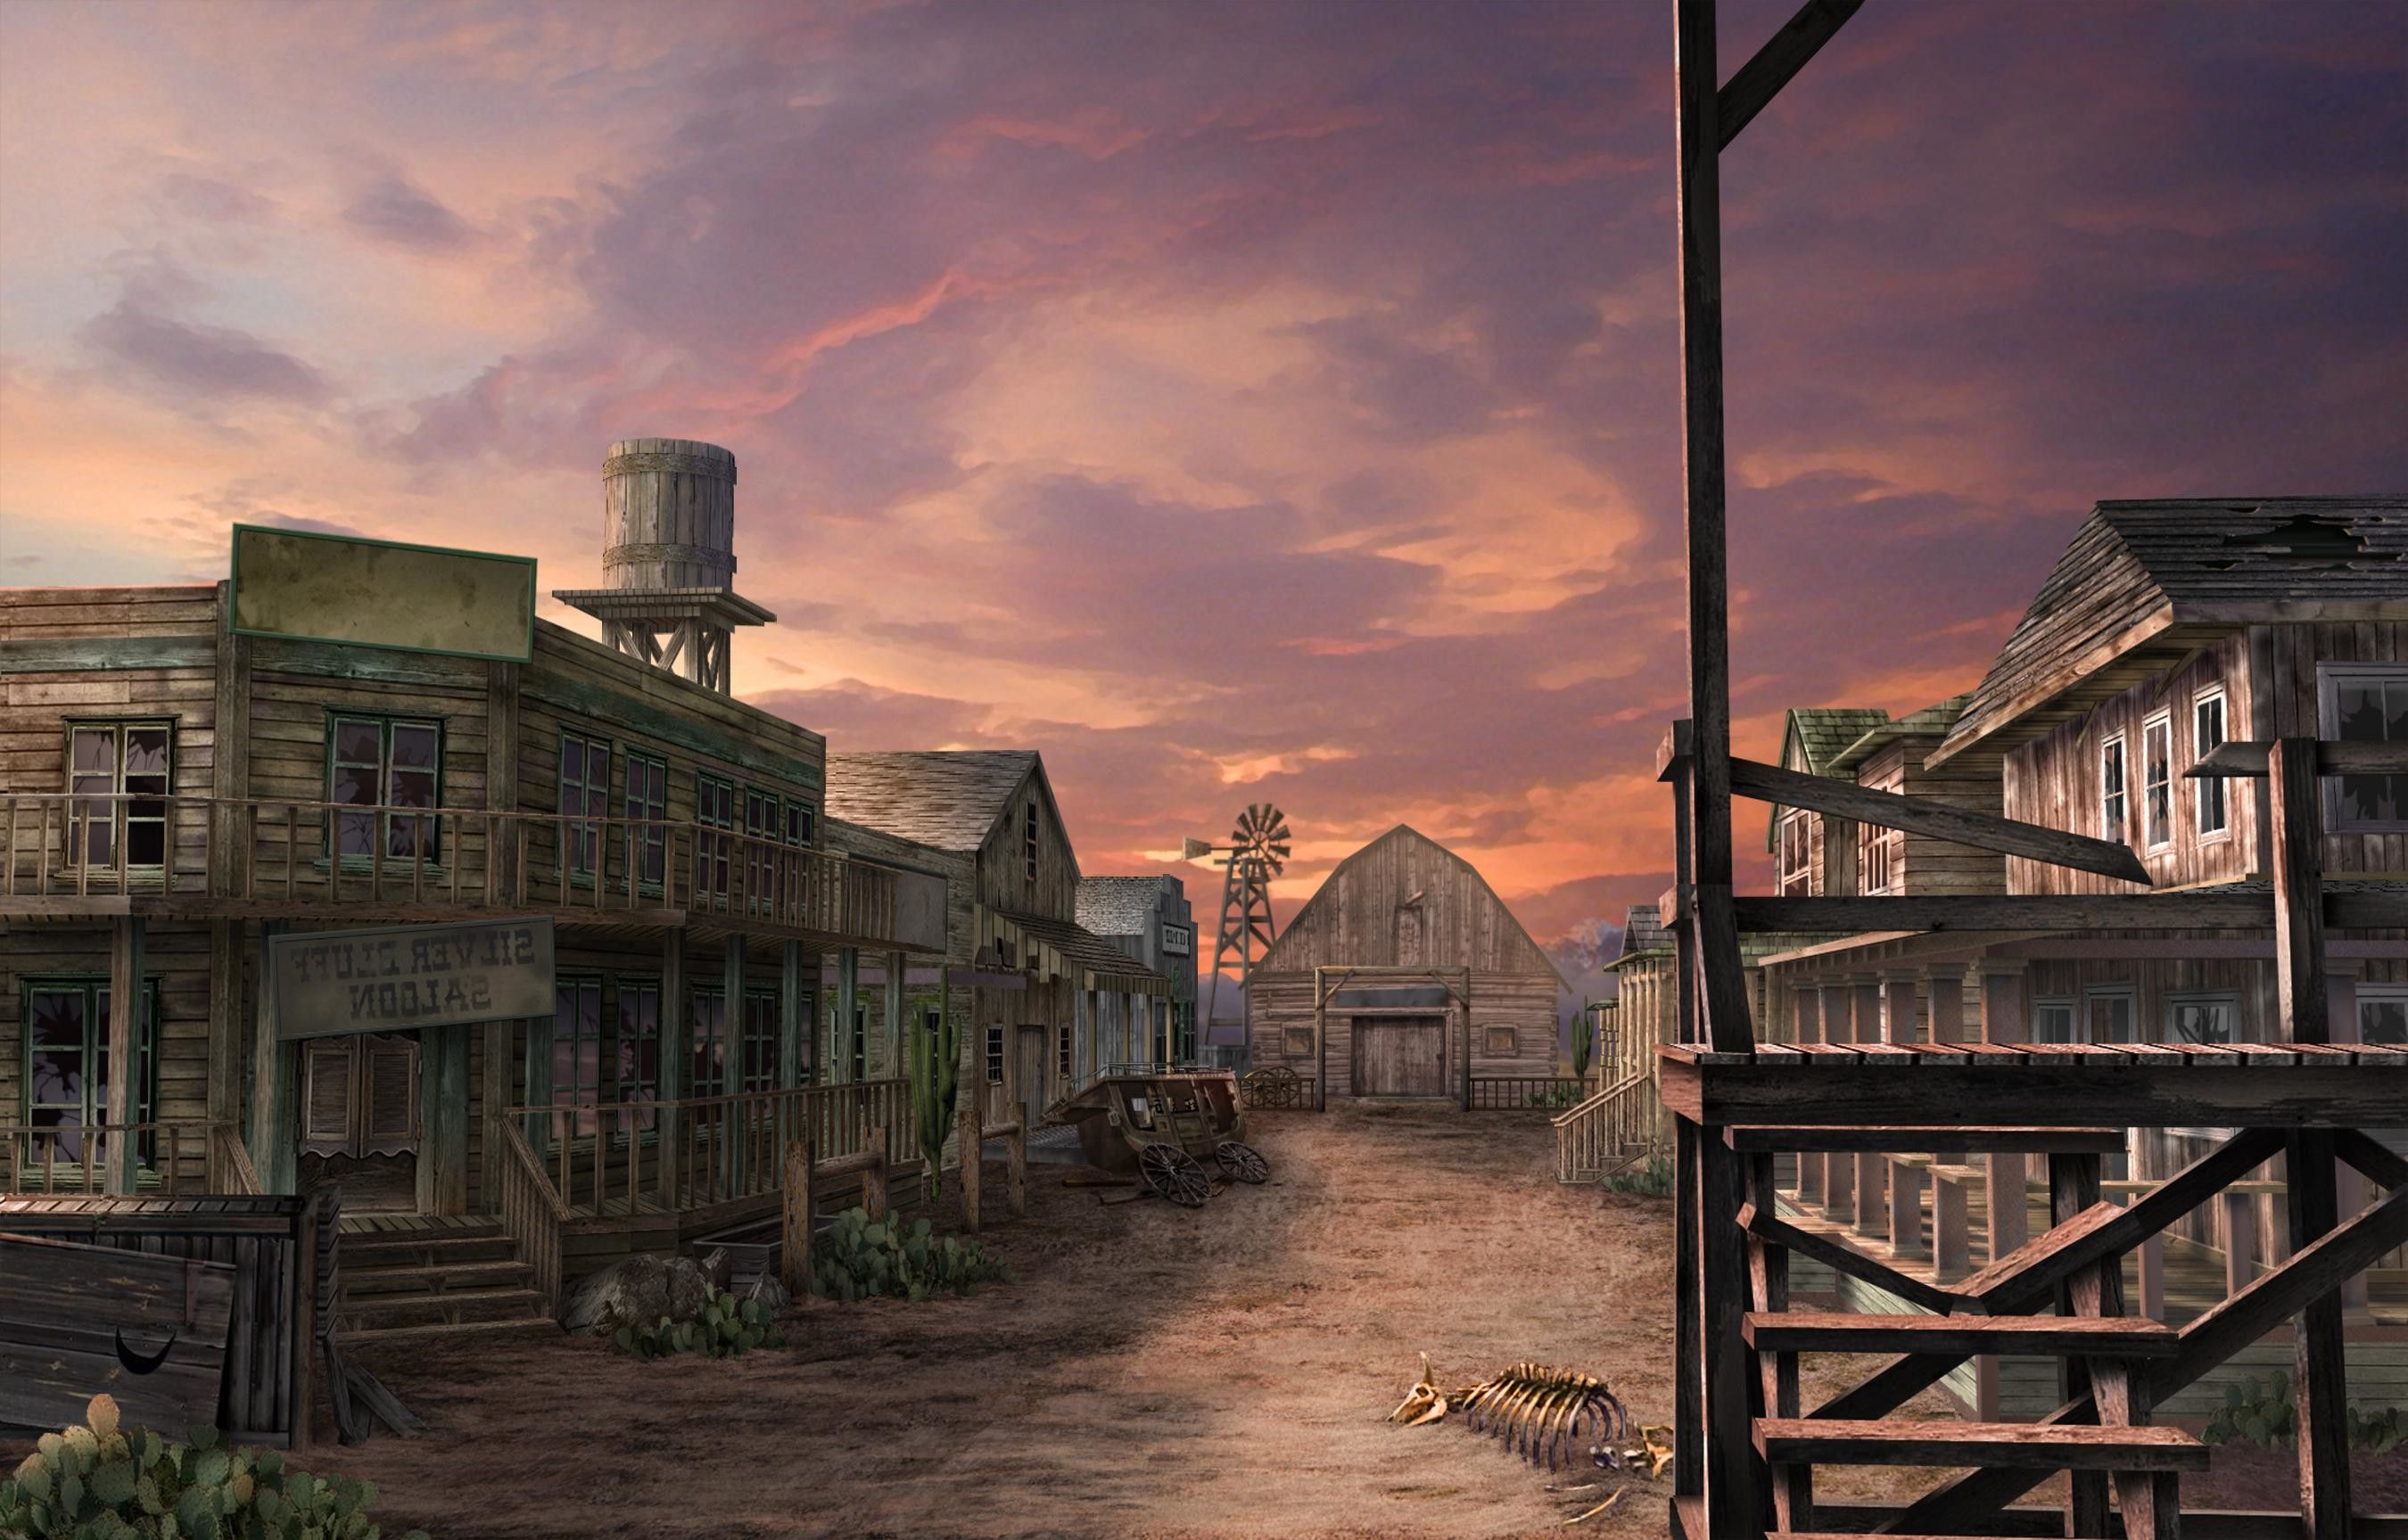 Old West Background Images, HD Pictures and Wallpaper For Free